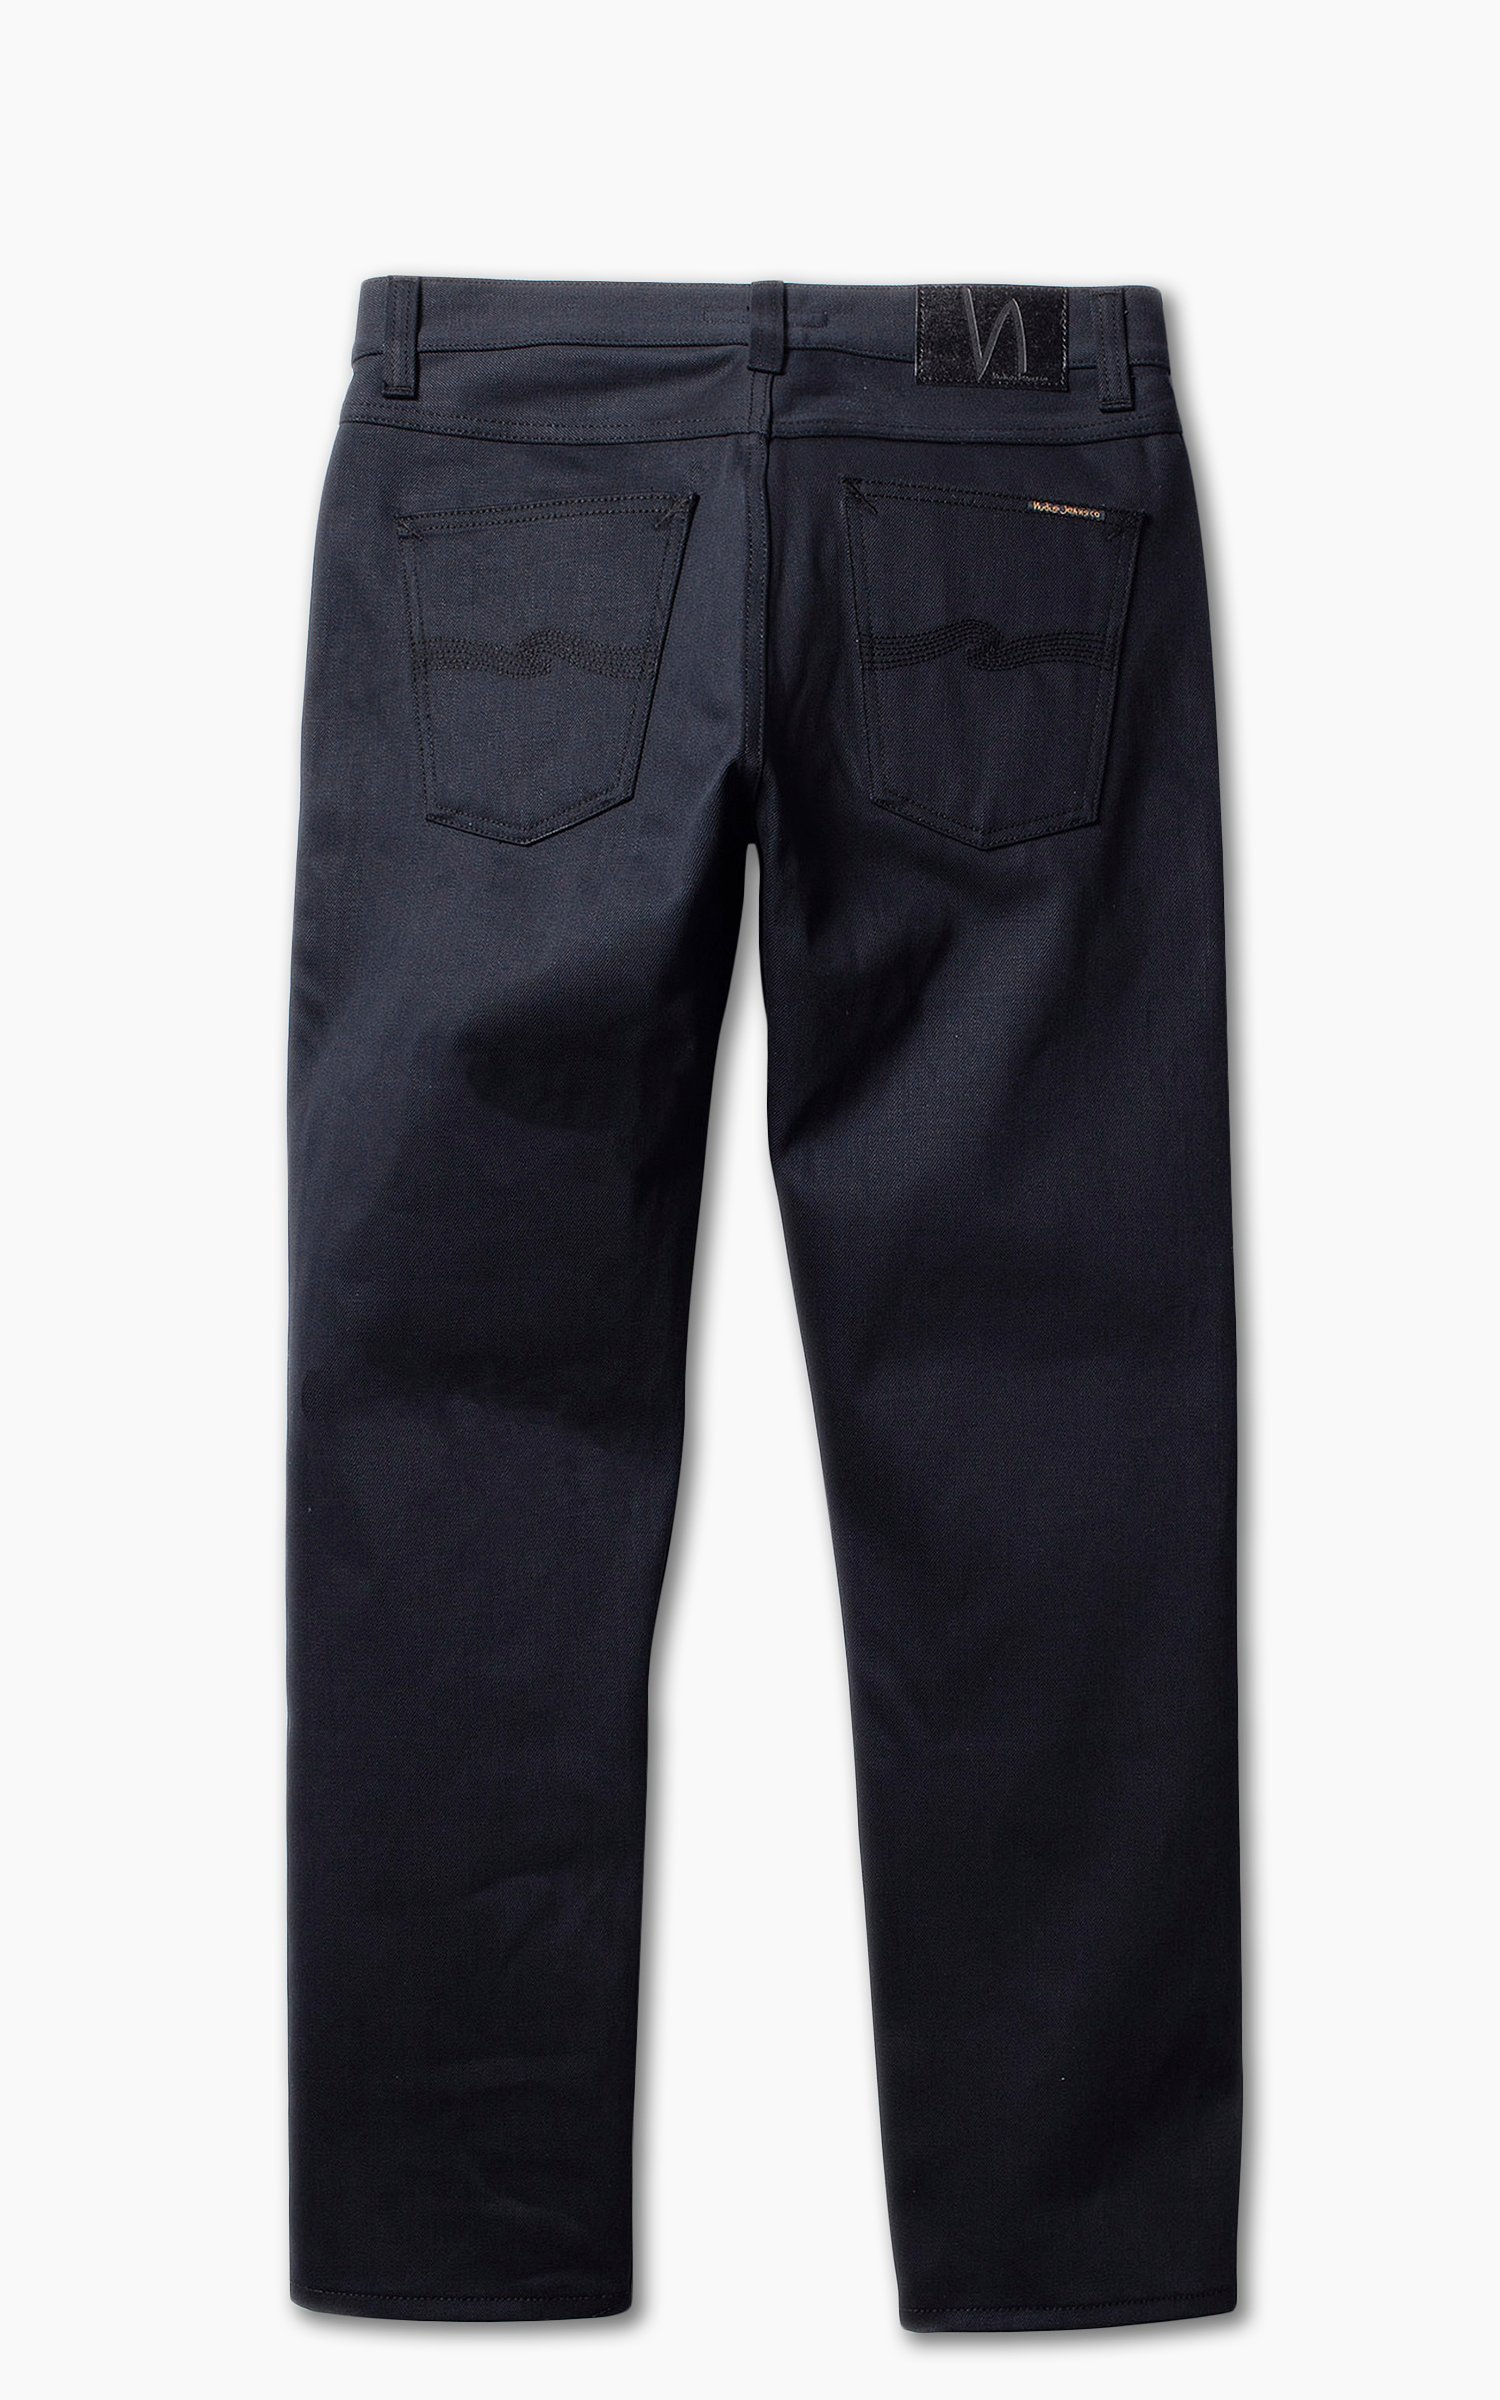 Gritty Jackson Dry Onyx Selvage